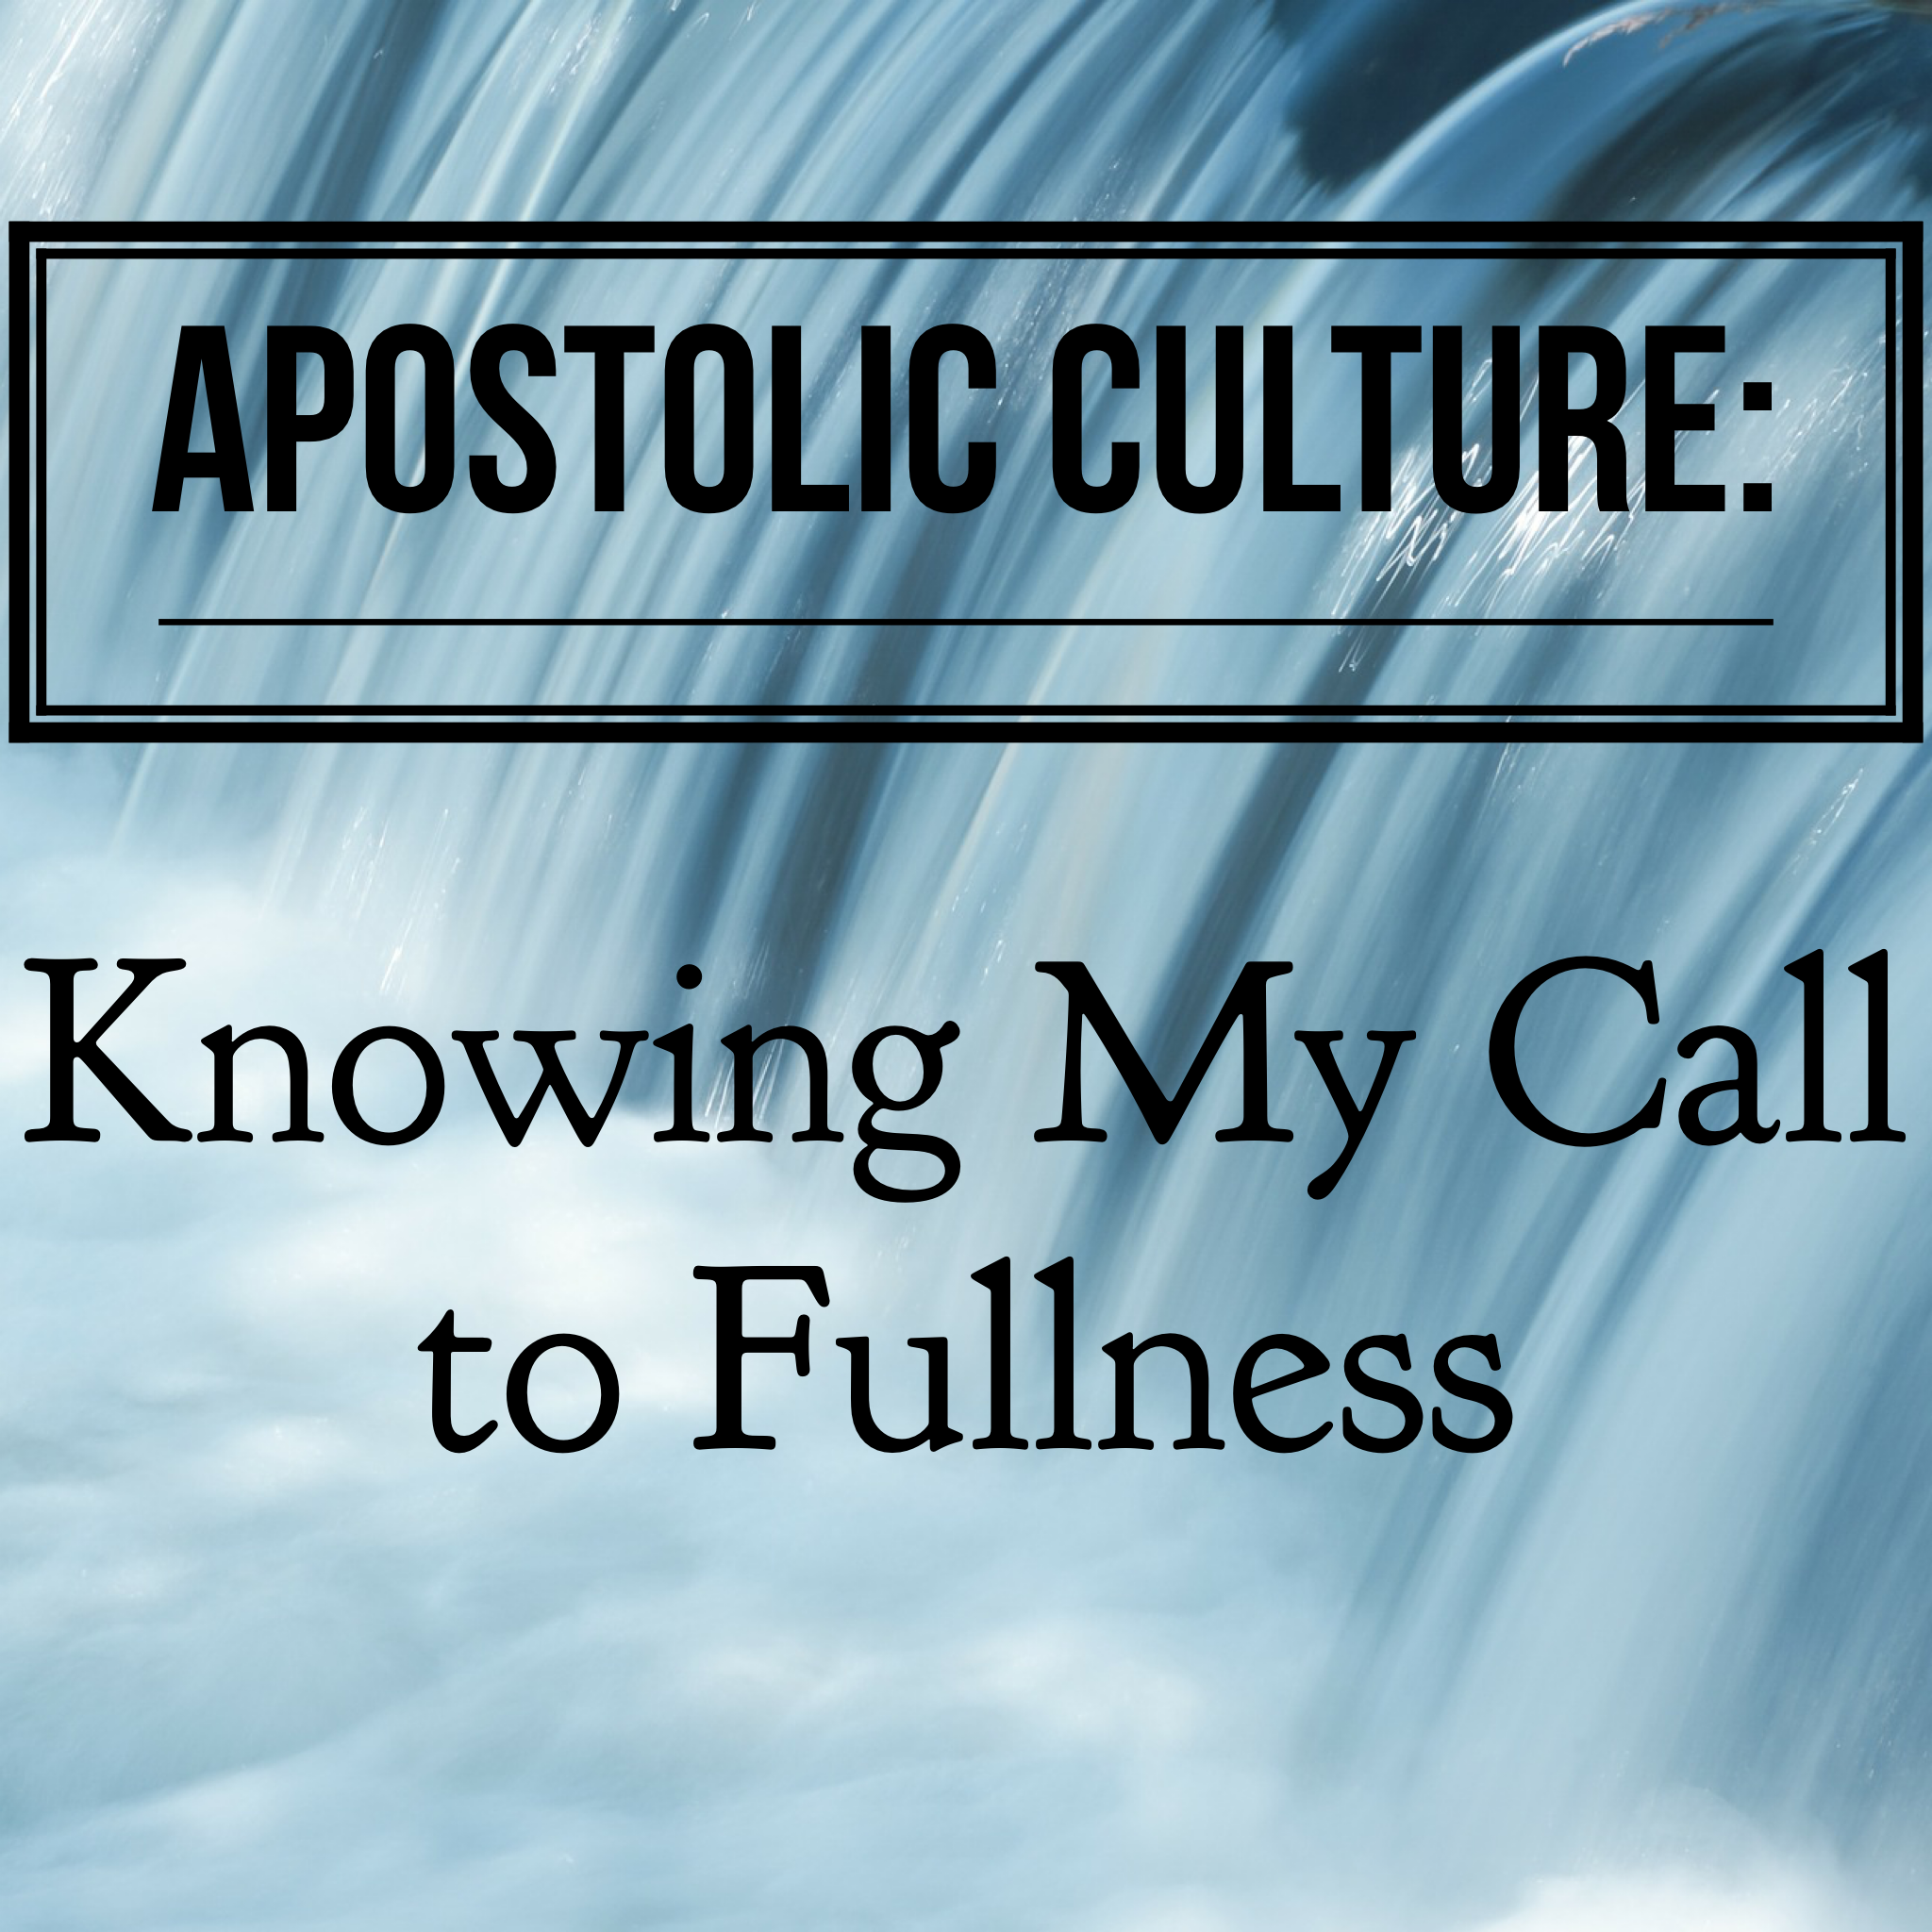 Apostolic Culture: Knowing My Call to Fullness - 3/26/19